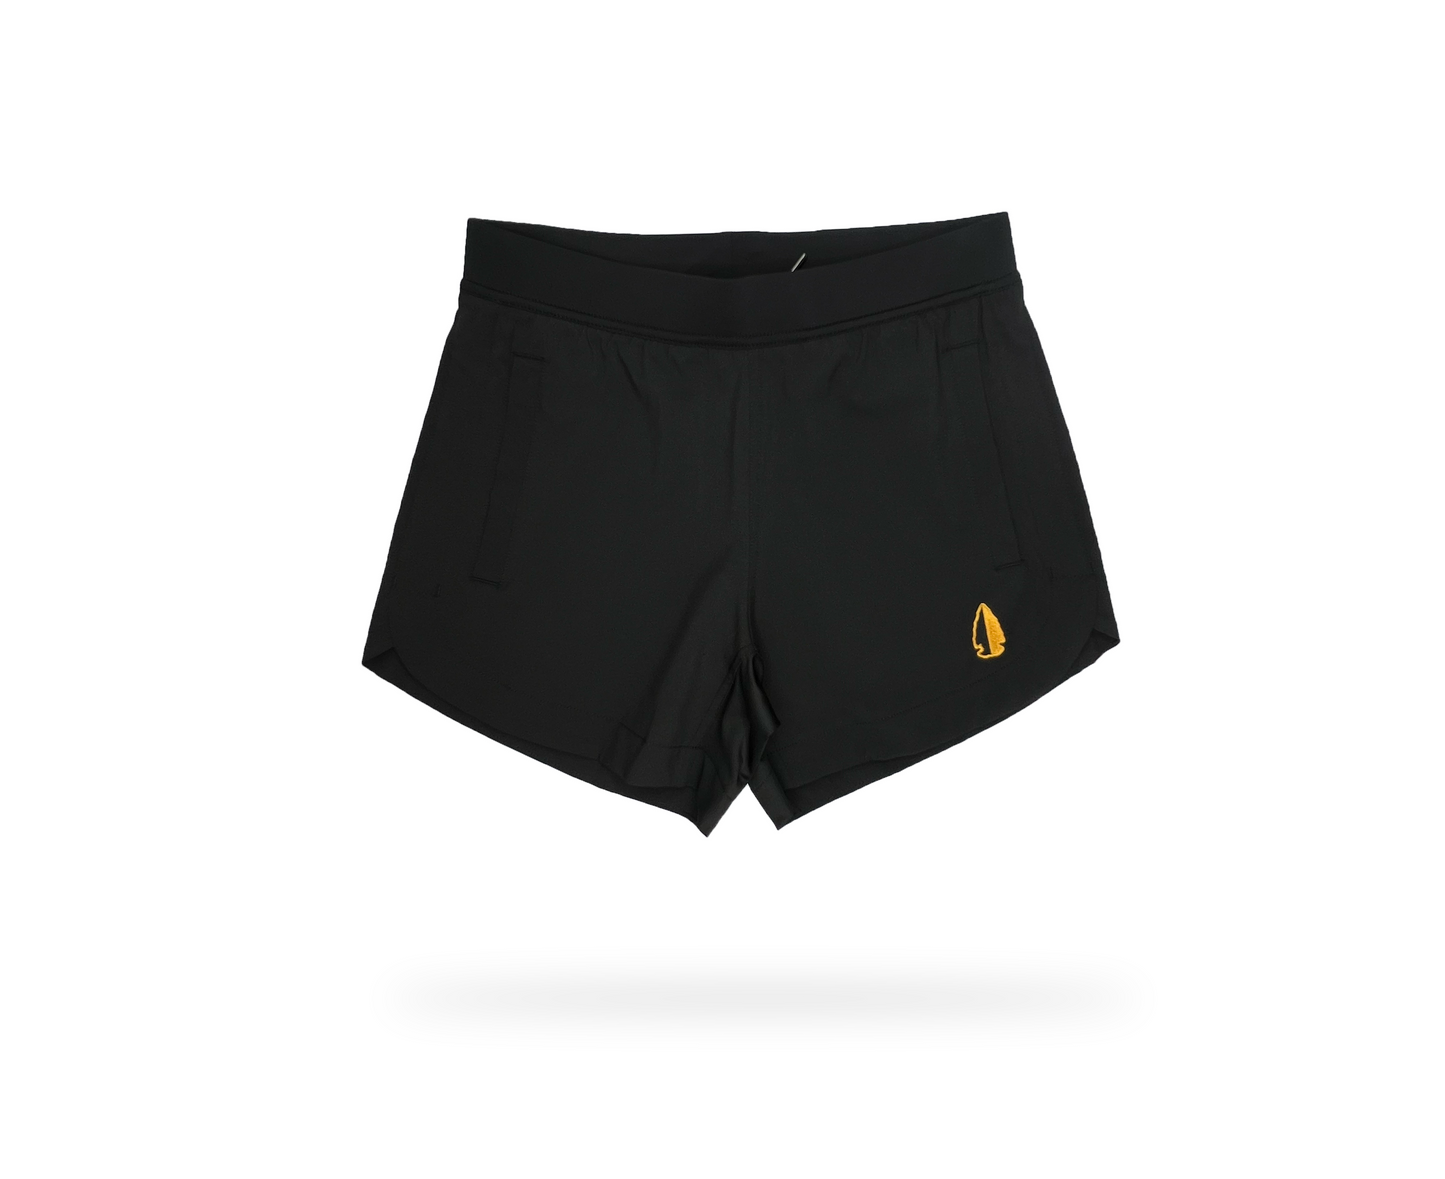 Women's V2 Athletic Shorts - Black and Gold